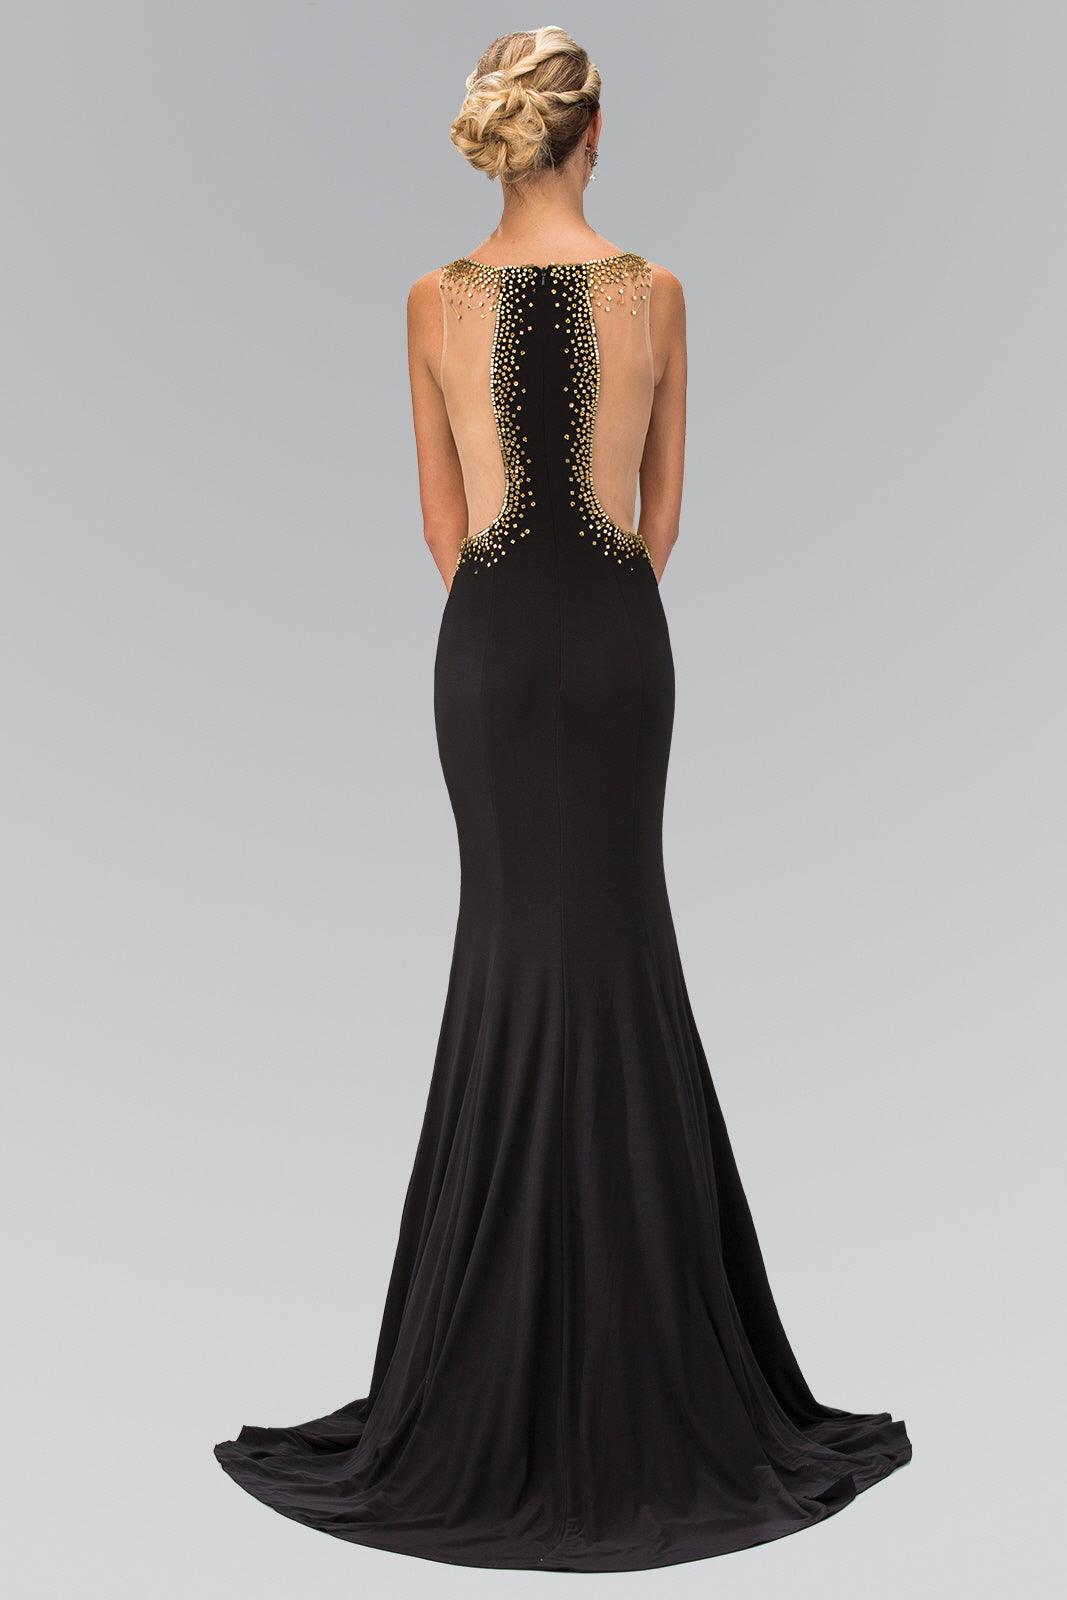 Long Prom Dress Accented with Gold Bead, Side Slit | Dress Outlet – The ...